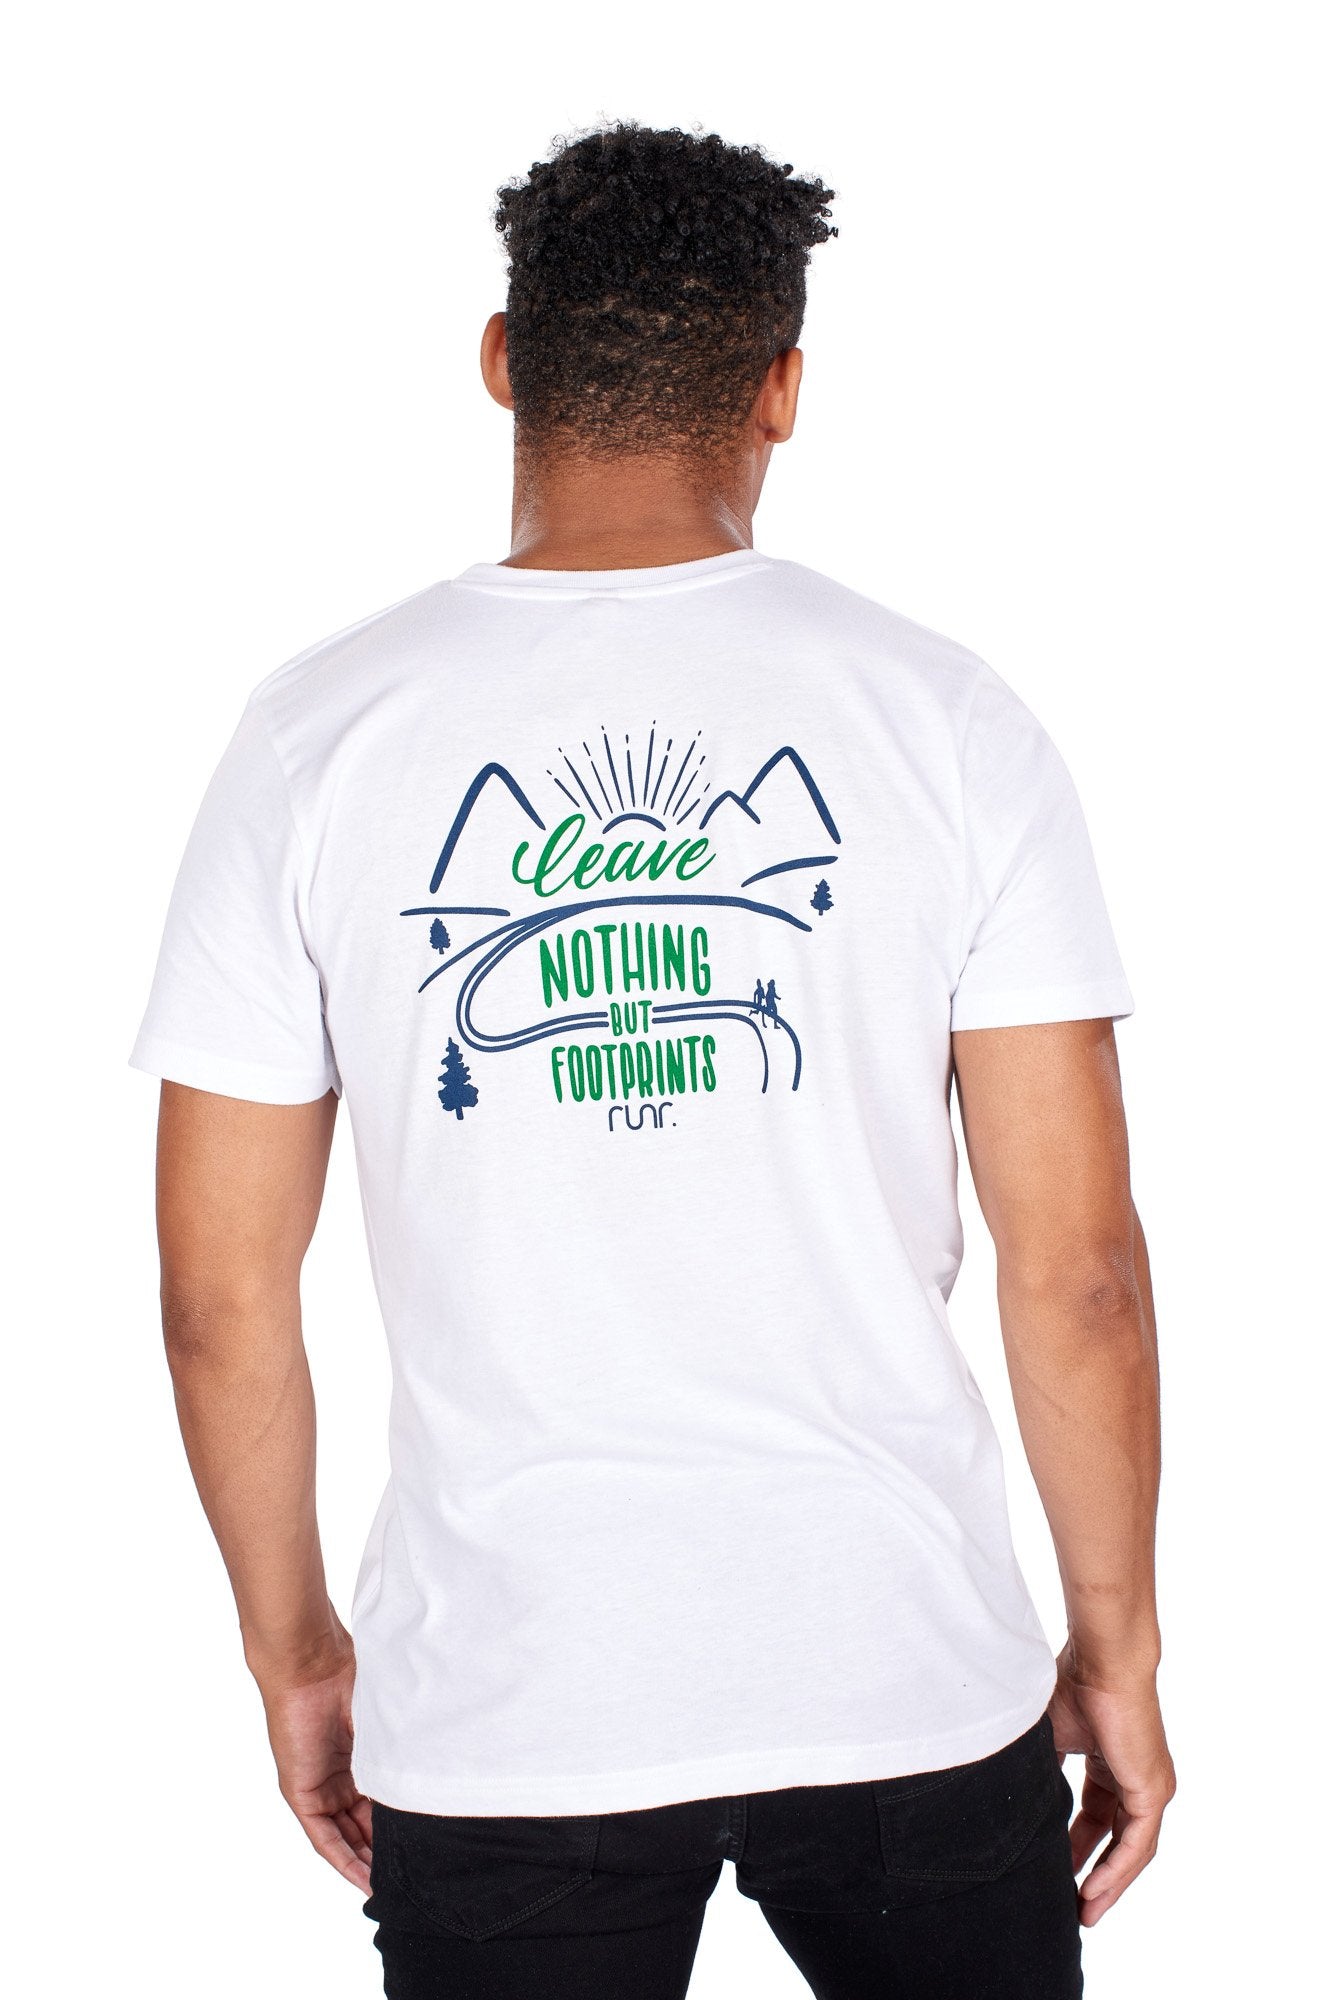 Men's 'Leave Nothing But Footprints' Runr T-Shirts in white